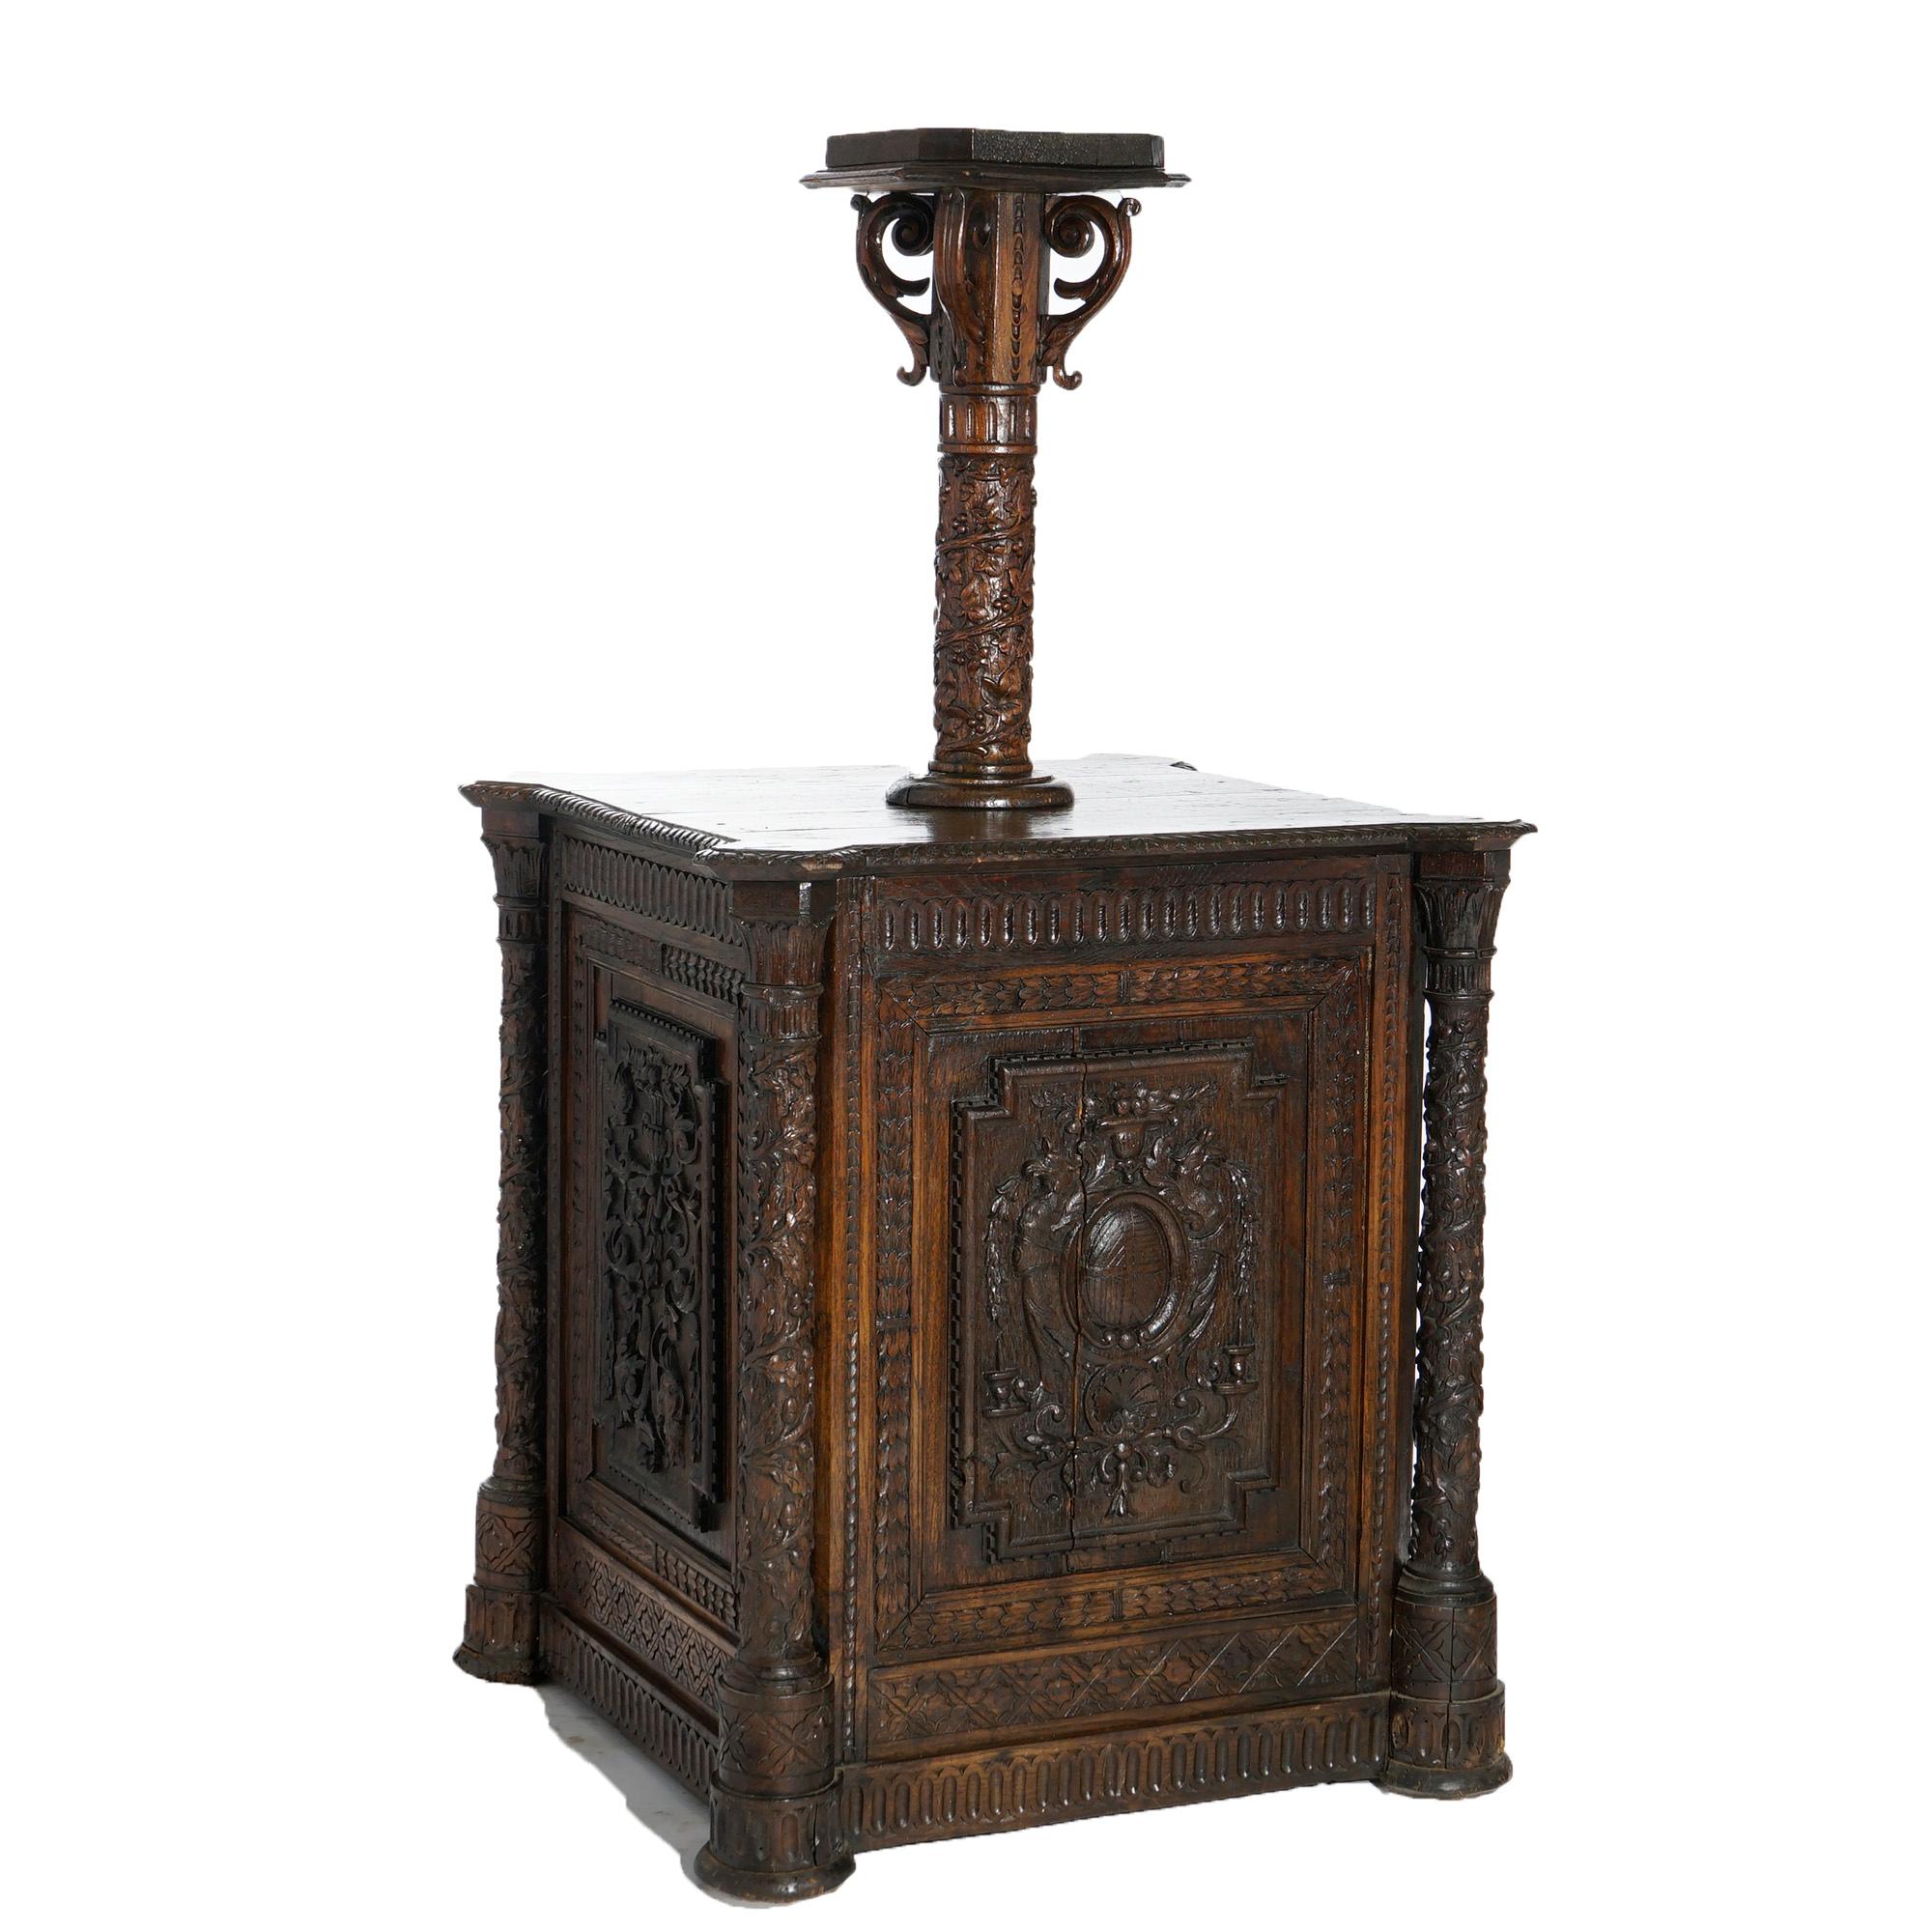 European Early Antique Continental Carved Oak Reliquary Cabinet & Carved Columns 18th C For Sale